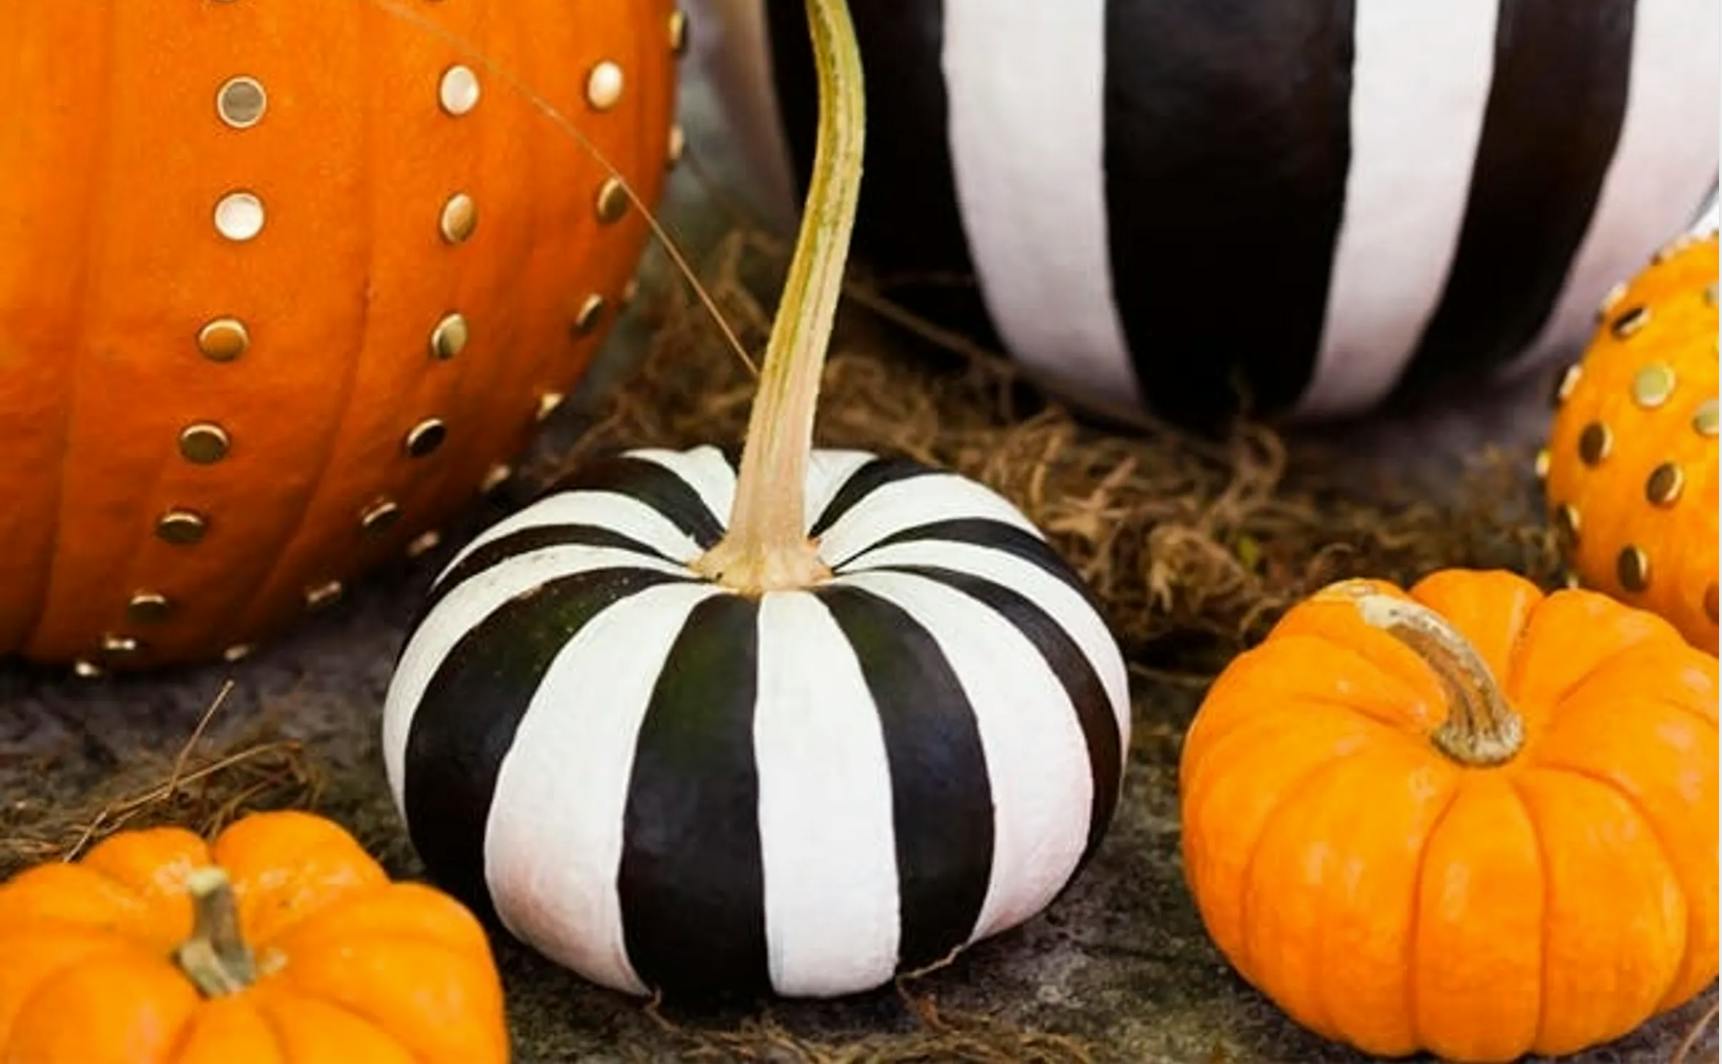 Close-up of an assortment of orange and black and white vertically striped pumpkins on the ground.